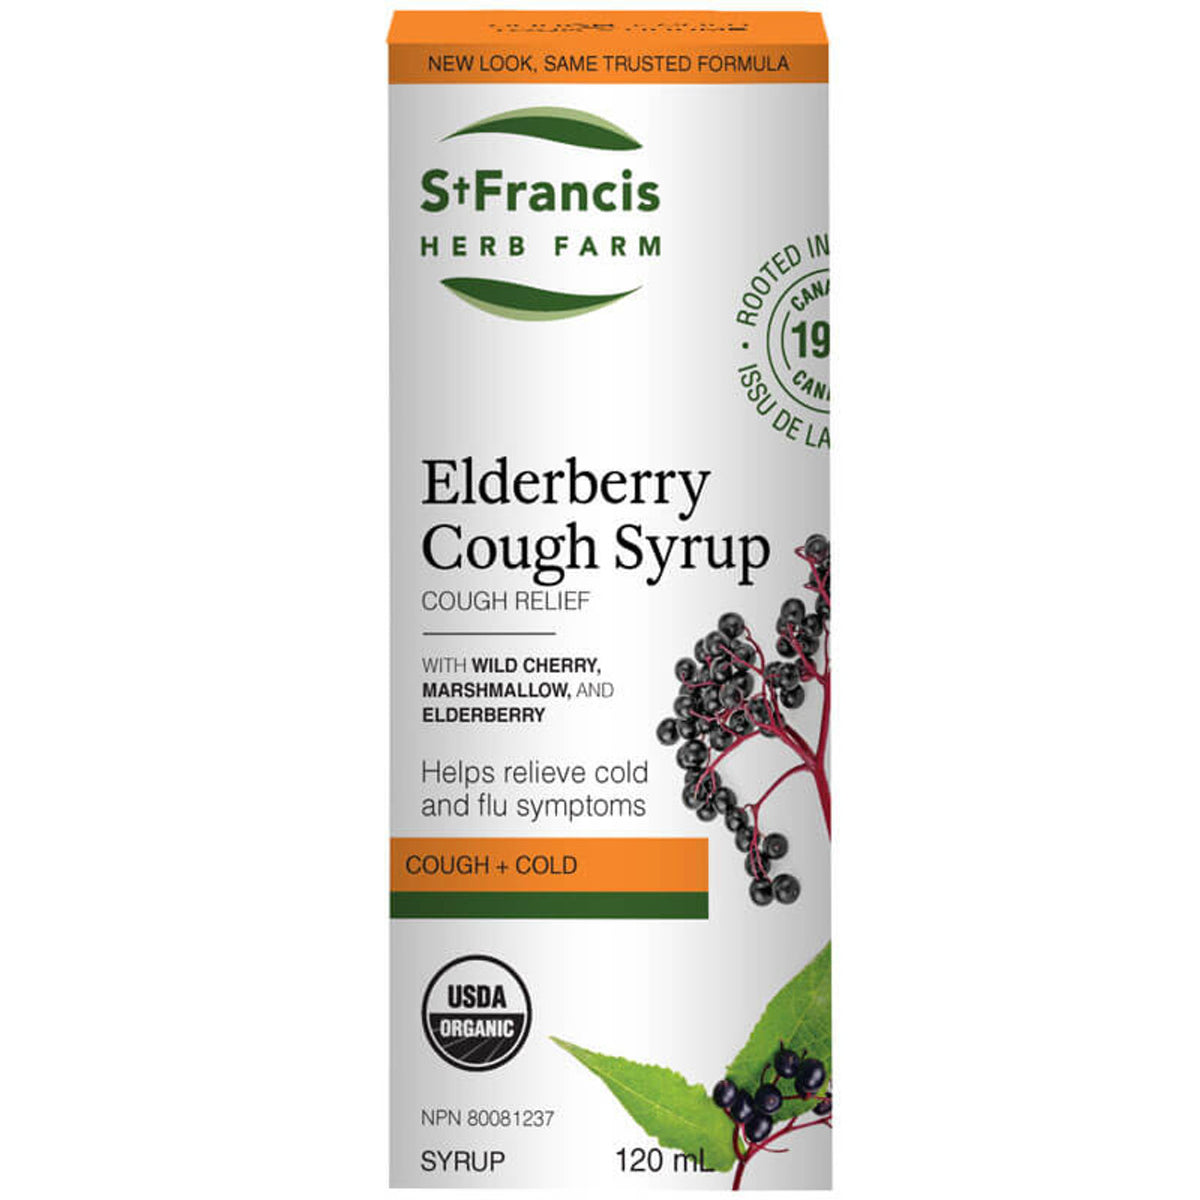 St Francis Elderberry Cough Syrup for Adults 120 ml Cough, Cold & Flu at Village Vitamin Store